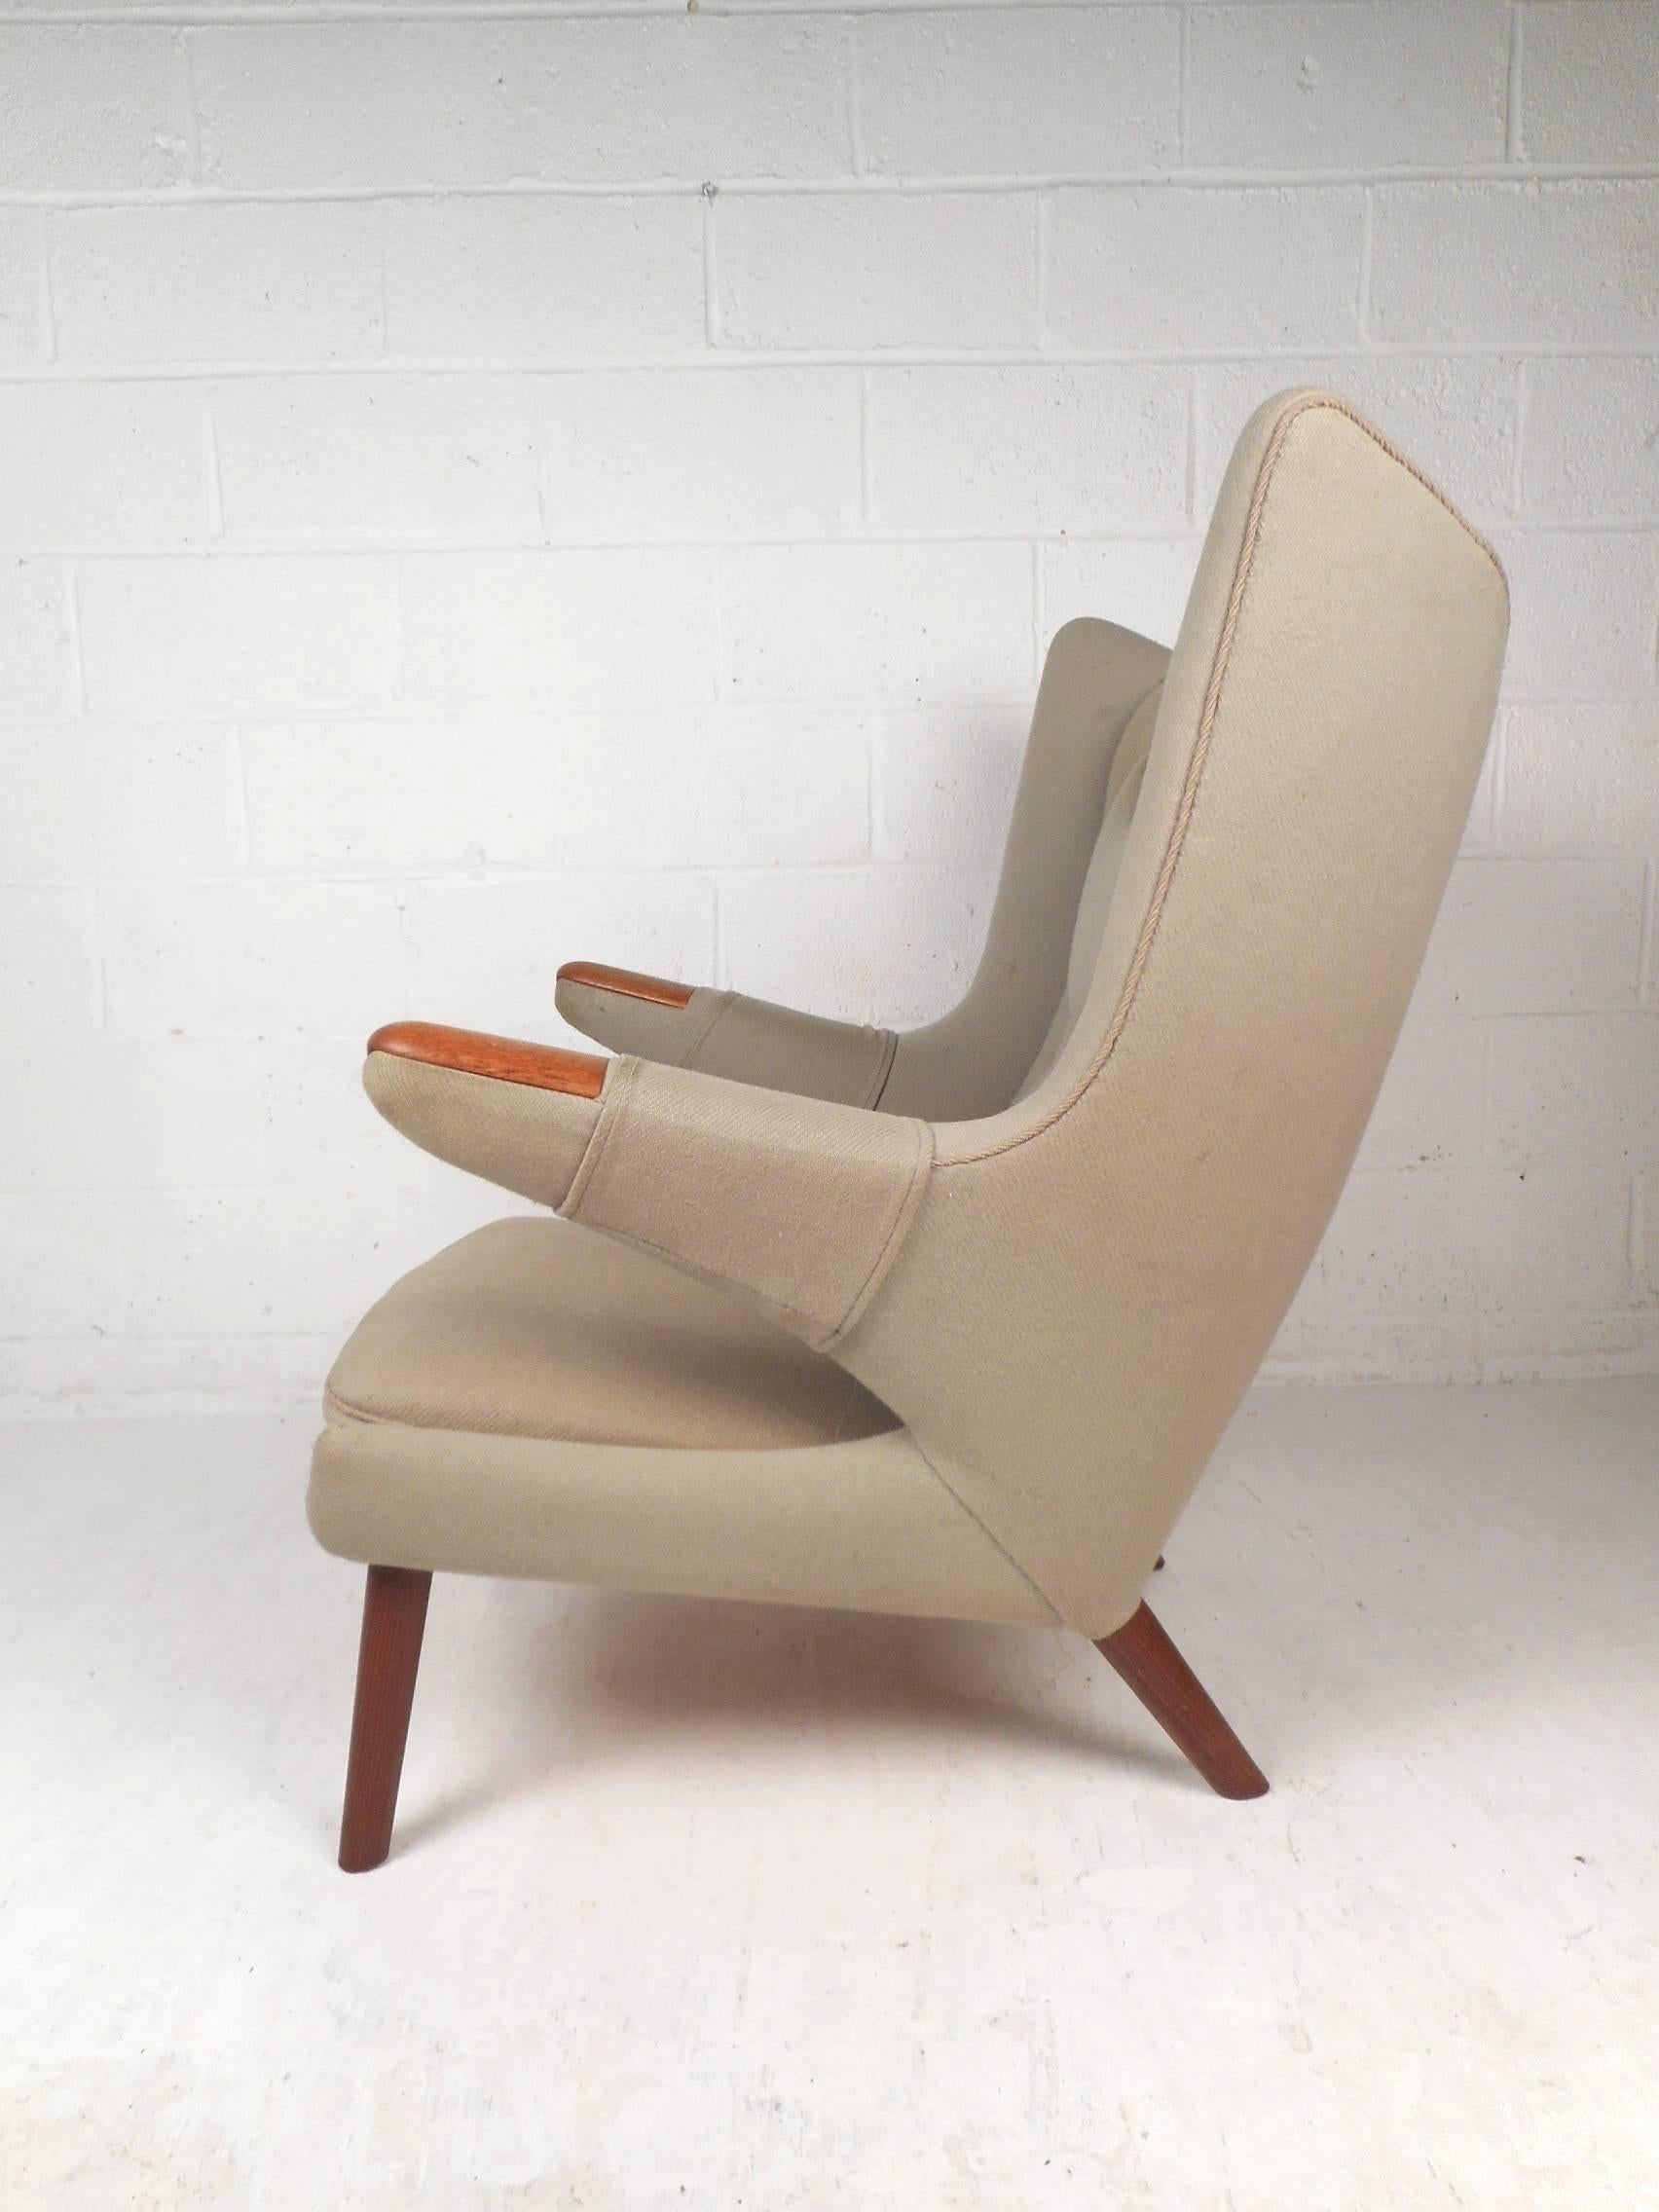 This beautiful vintage modern papa bear chair features a unique winged backrest and soft tufted upholstery. Sleek design with teak tipped armrests, splayed legs and thick padded seating. The stylish angled armrests and high backrest ensure optimal